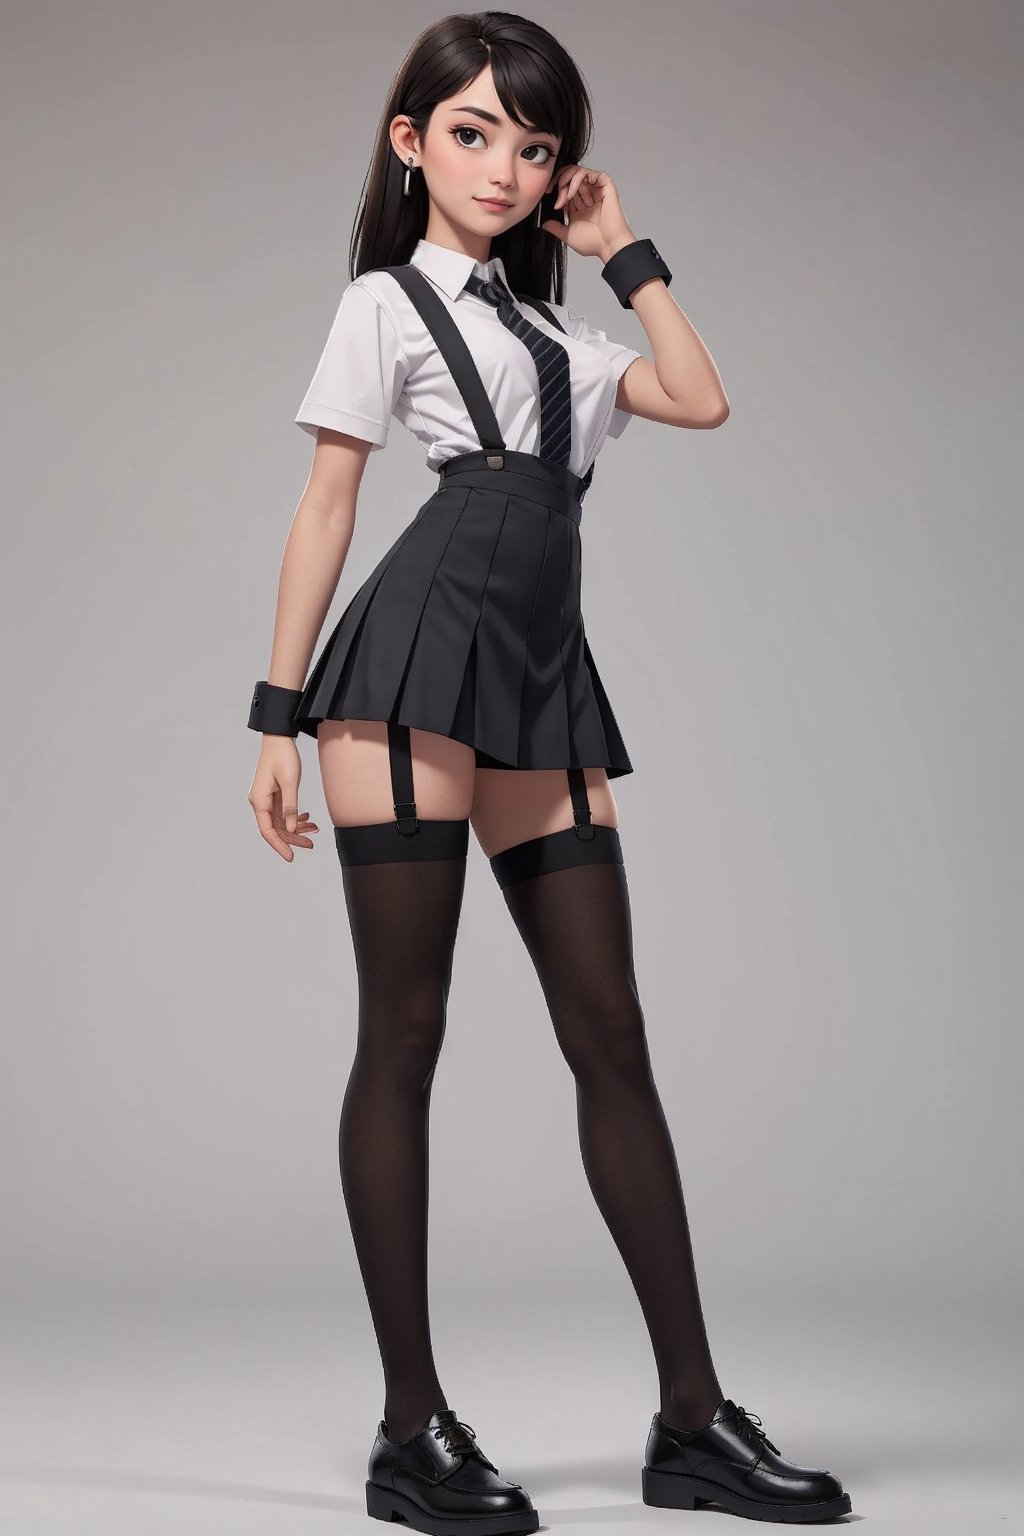 character sheet, student clothes, beautiful, good hands, full body, looking to the camera, good body, 18 year old girl body, school shoes, school skirt, school shirt, black shoes, sexy pose, full_body, with small earrings, character_sheet, fashionable hairstyle, school_uniform, shoes_black, with  school_shoes_black, arcane style, clothes with accessories, denier tights in beige, stockings_colorbeige, Reclaimed Vintage side cut out tights in black, clothes sexy, Bluebella garter suspender in black,brown hair, straight hair, fair skin, light eyes,ring on finger